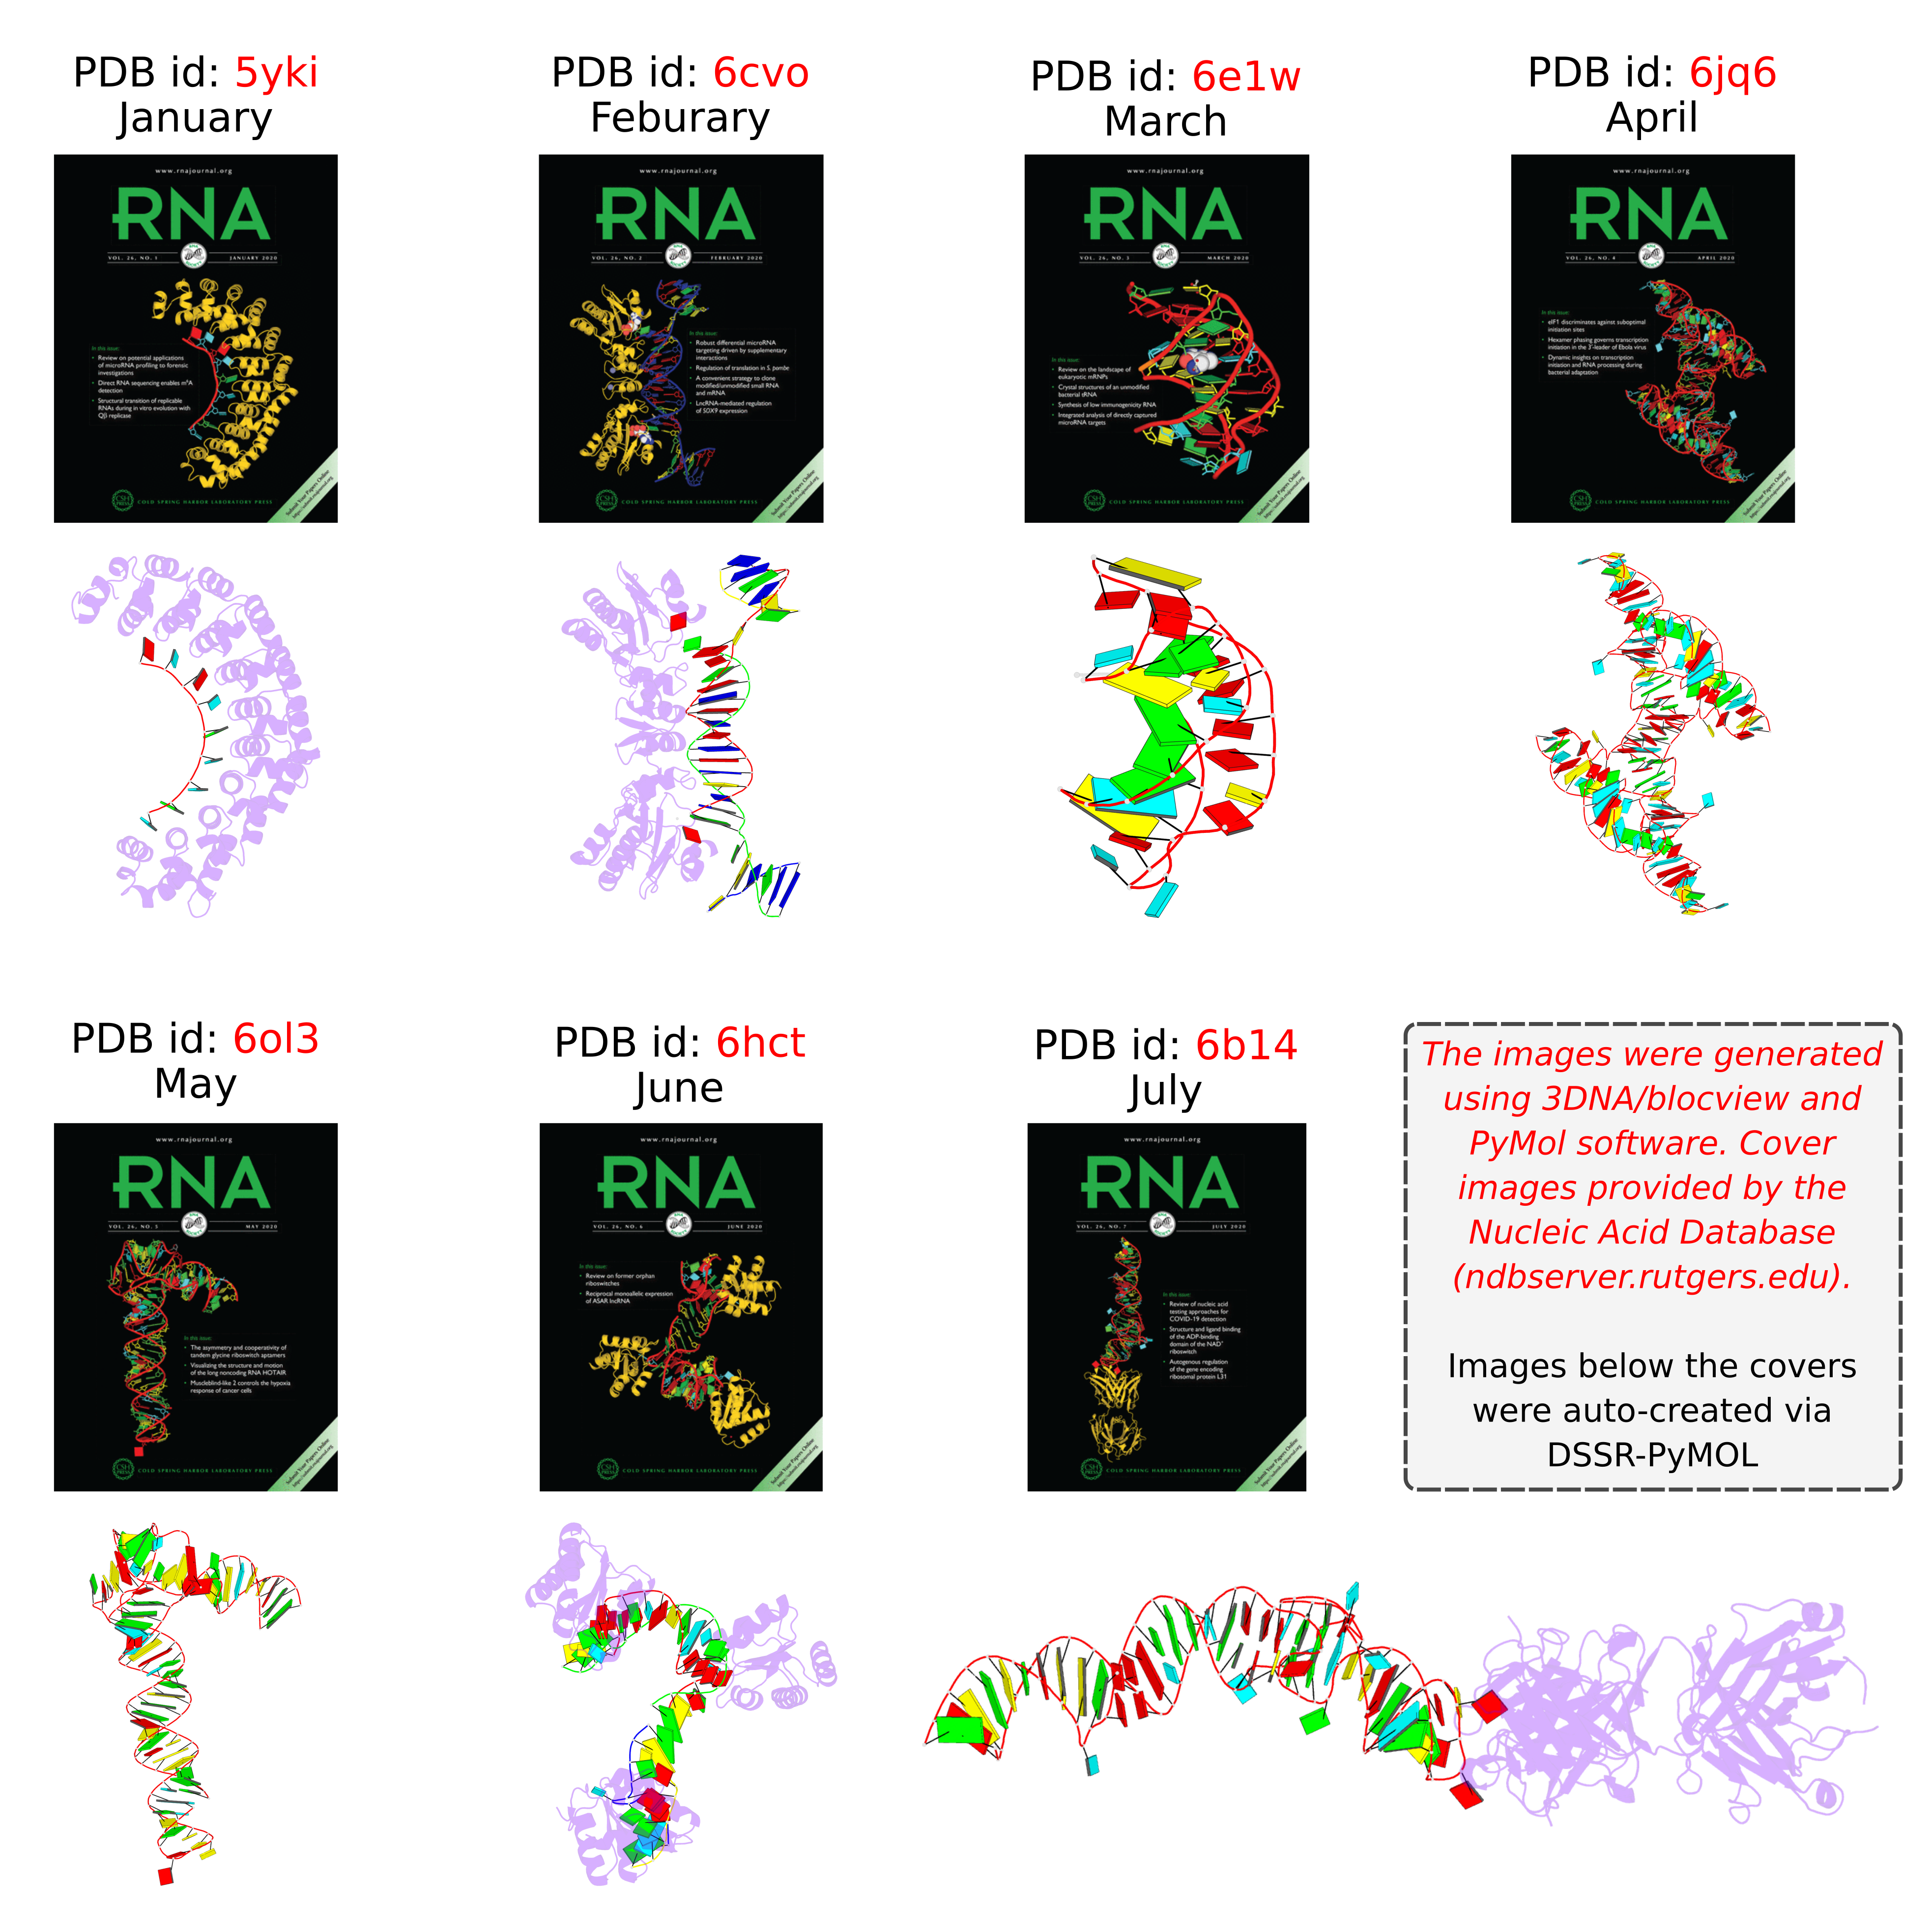 3DNA/blockview-PyMOL and DSSR-PyMOL cartoon-block schematics in the covers of the RNA journal in 2020